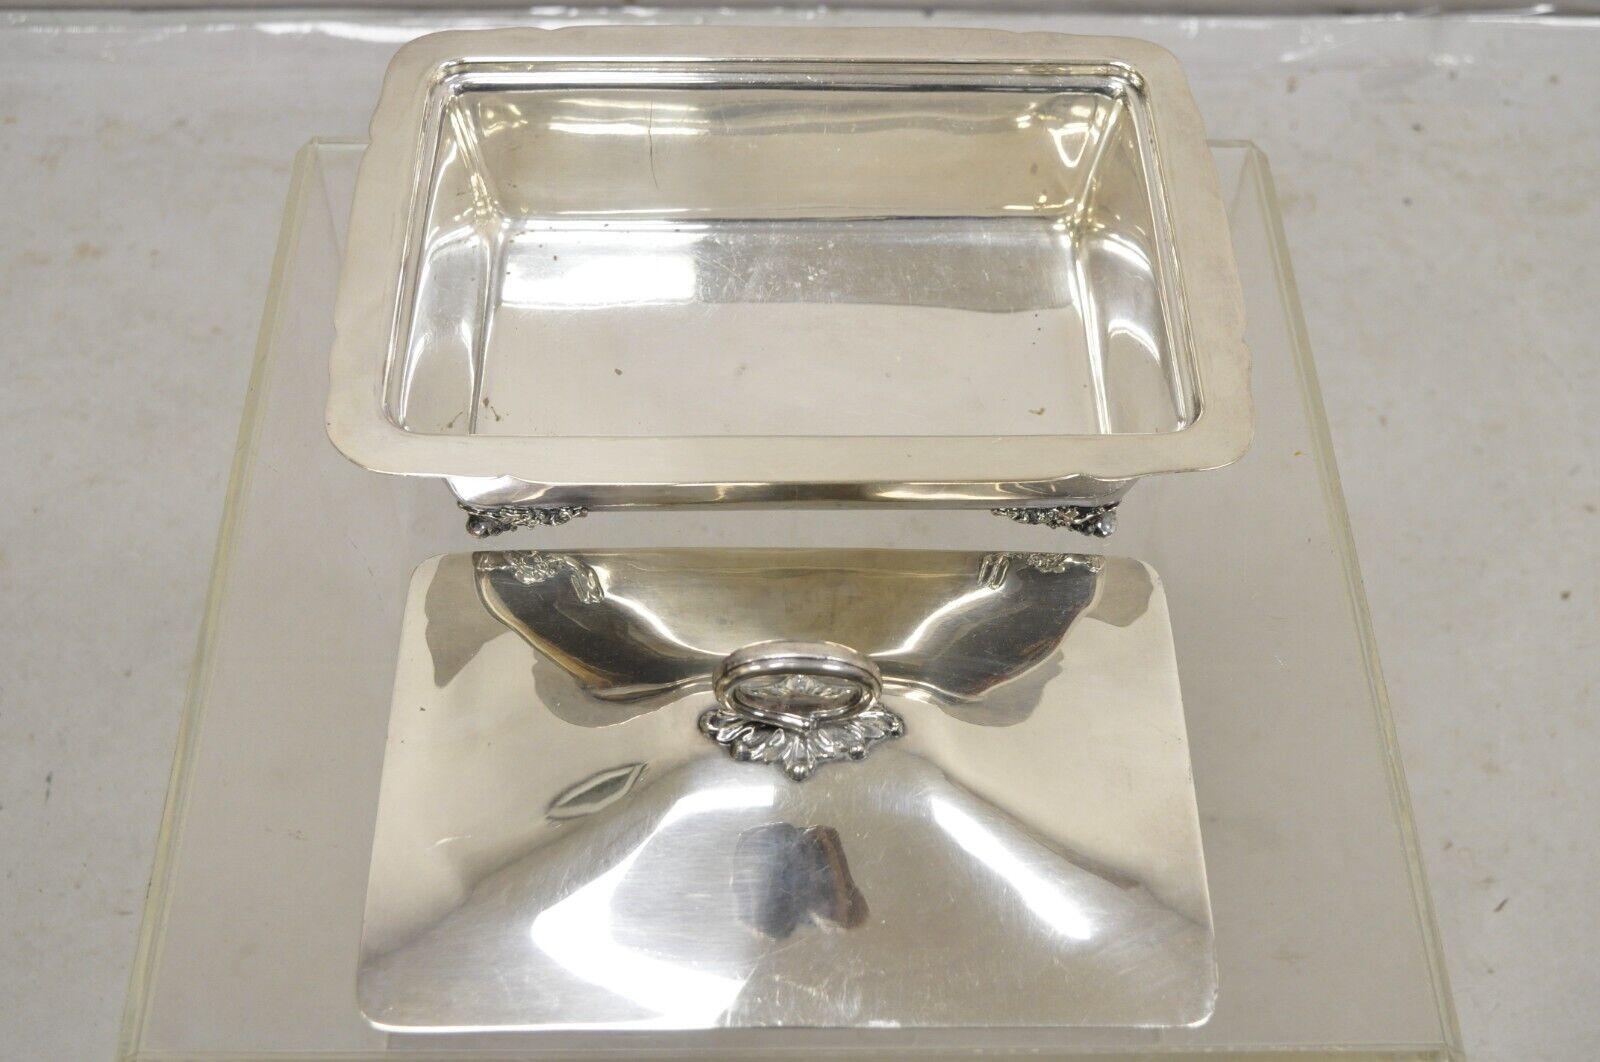 Vintage Reed & Barton Mayflower 5006 Silver Plated Covered Casserole Serving Dis For Sale 2